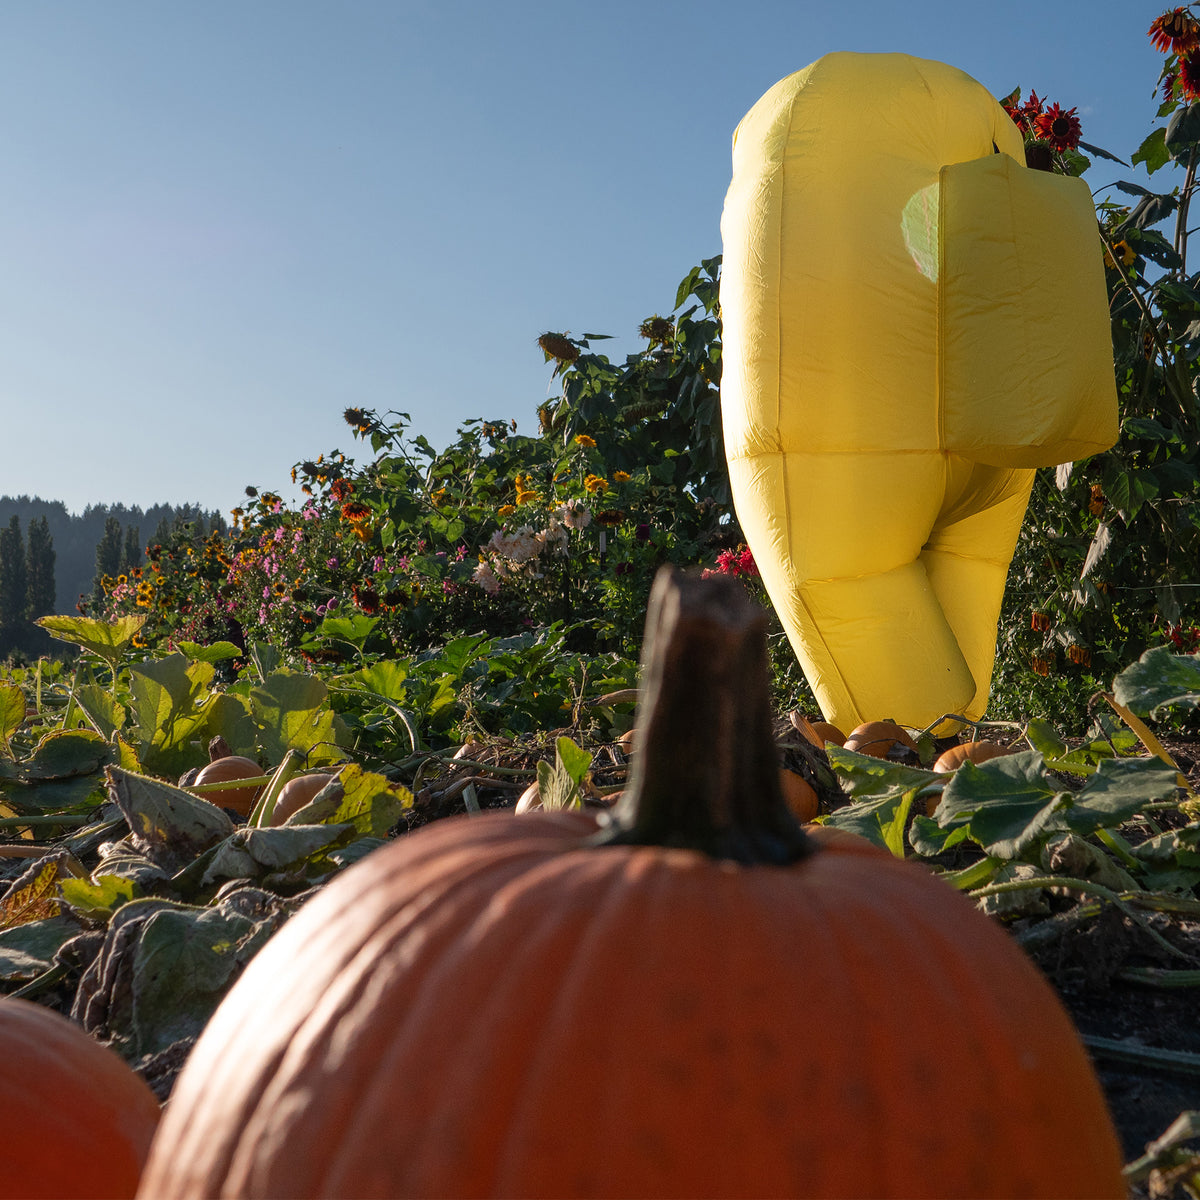 A photograph of the back of the yellow inflatable Crewmate standing in a grassy pumpkin patch.